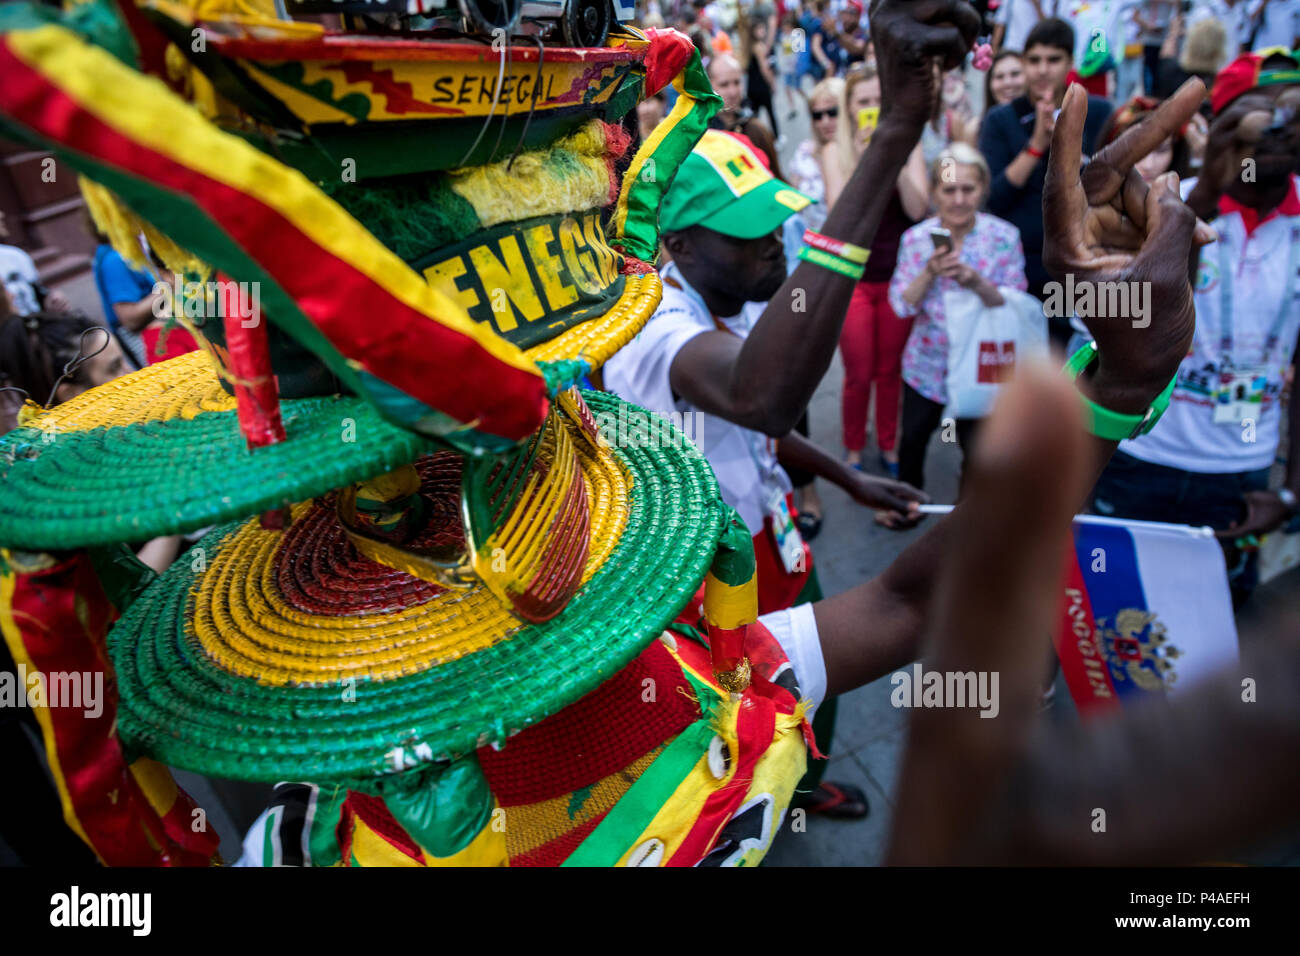 Moscow, Russia. 21st June, 2018. Senegalese football fans sing and cheer on Nikolskaya street in central Moscow during the 2018 FIFA World Cup Russia Stock Photo